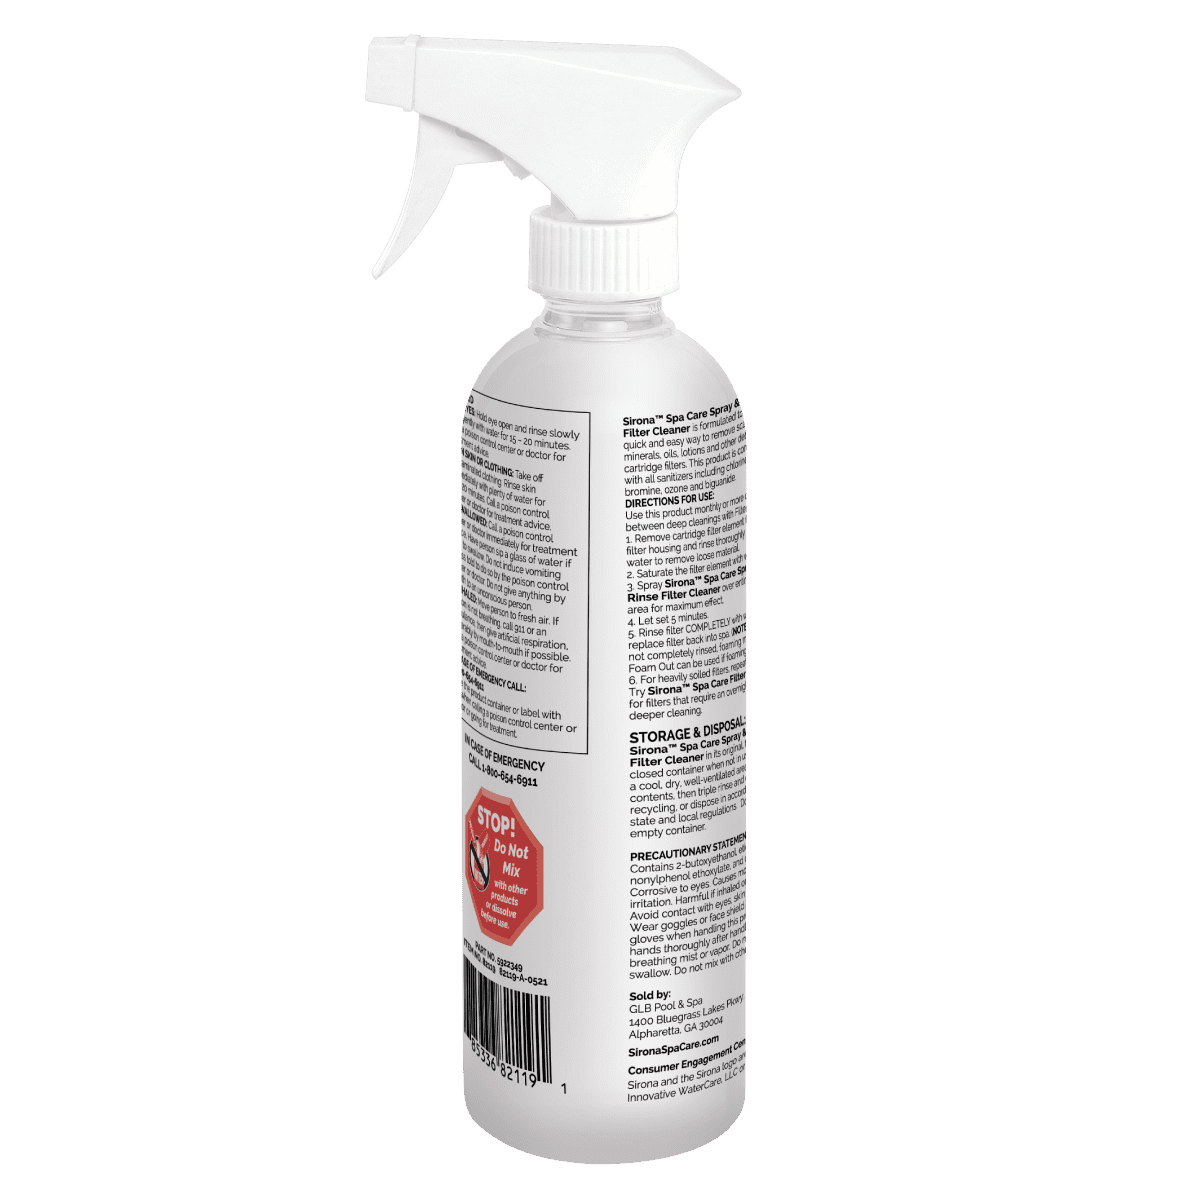 Sirona Spa Care Spray & Rinse Cartridge Filter Cleaner